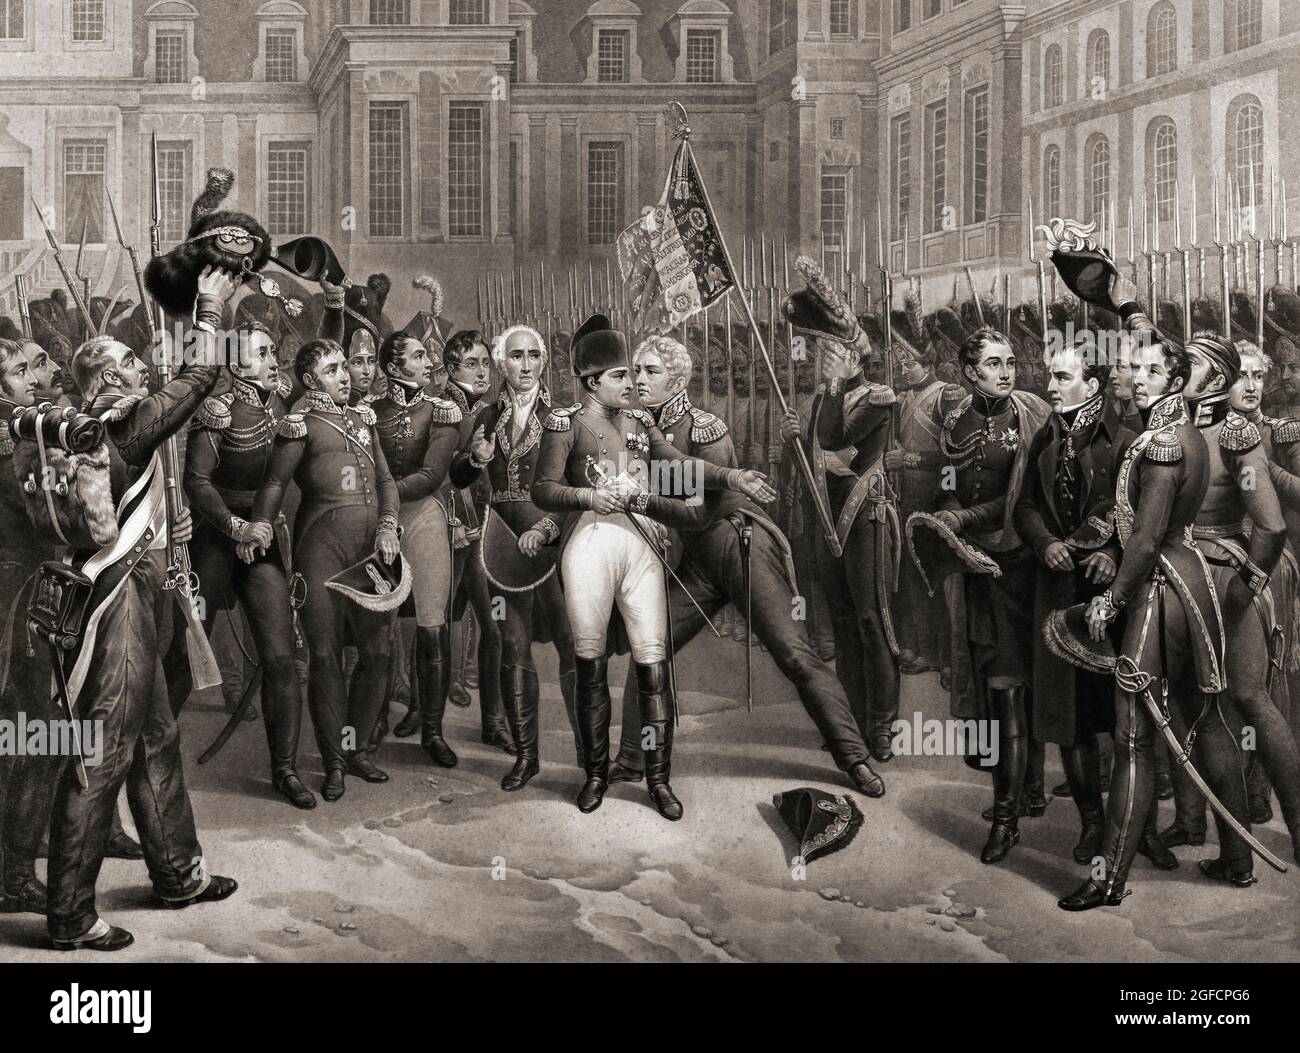 Napoleon's farewell to the Old Guard at Fontainbleau, April 20, 1814 after his first abdication. Napoleon Bonaparte, 1769-1821, Emperor of the French.  After an engraving by Vincenz Georg Kininger, from a work by Horace Vernet. Stock Photo